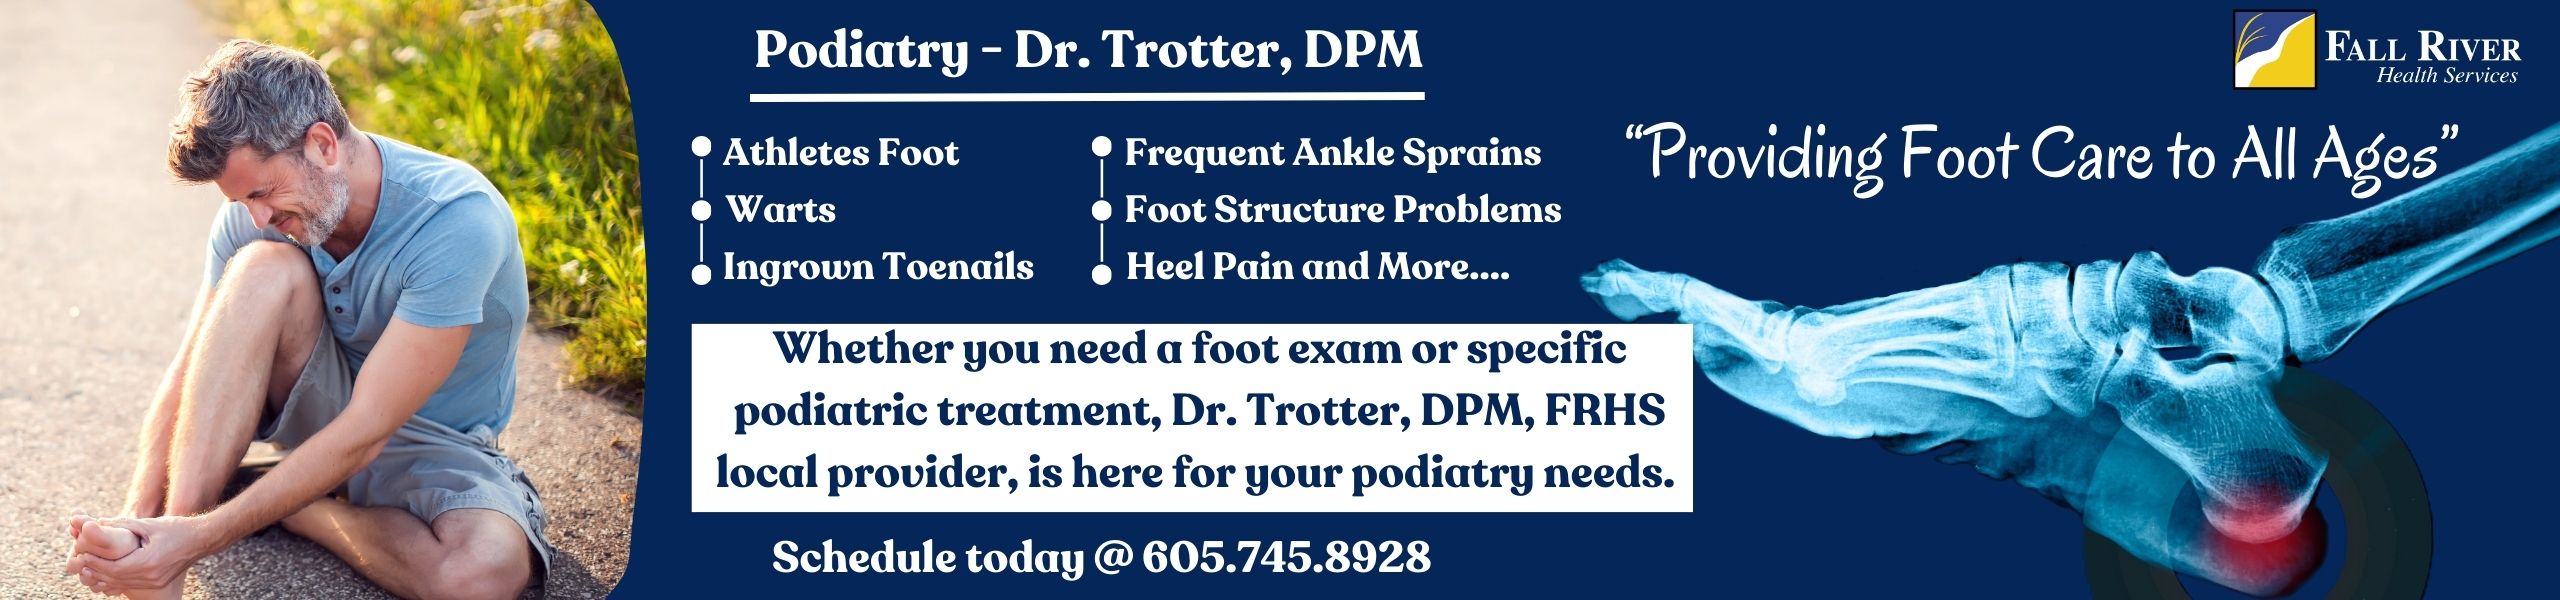 Dr. Trotter Ad